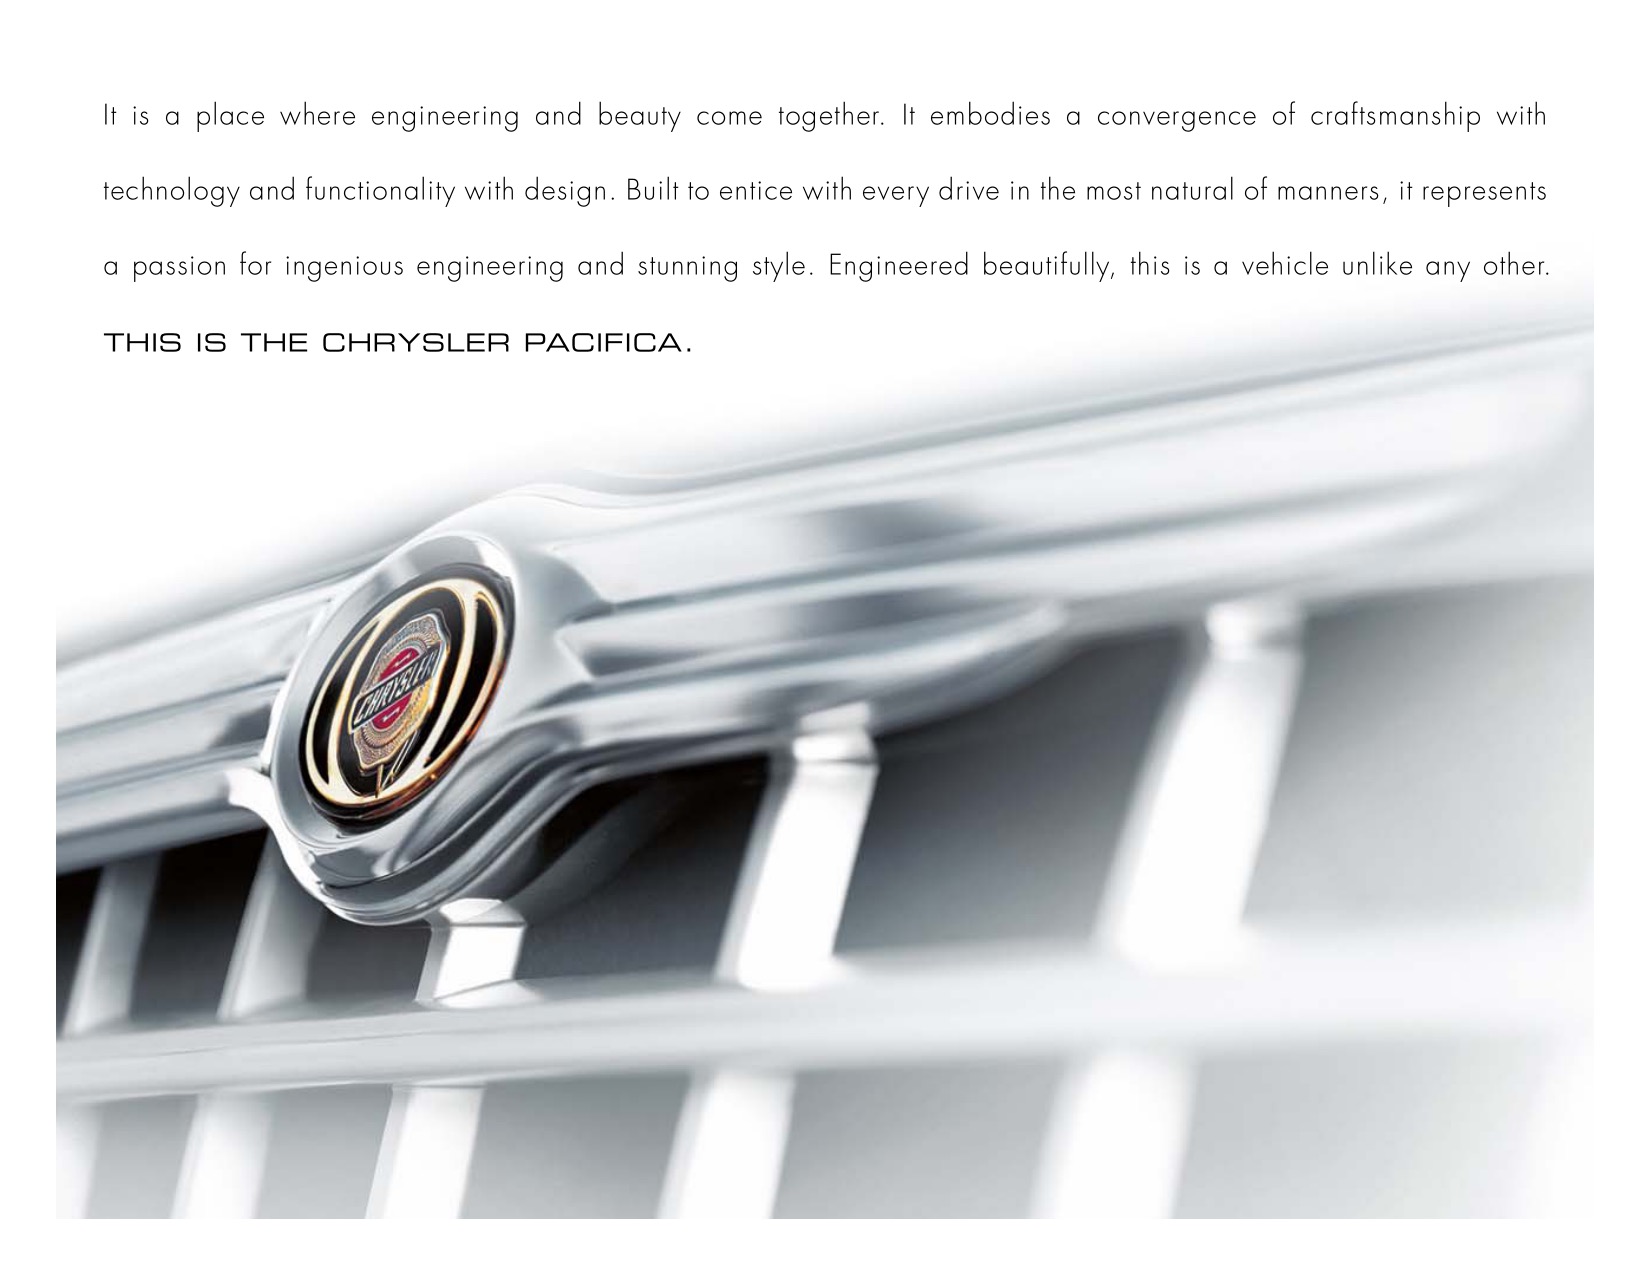 2008 Chrysler Pacifica Brochure Page 12